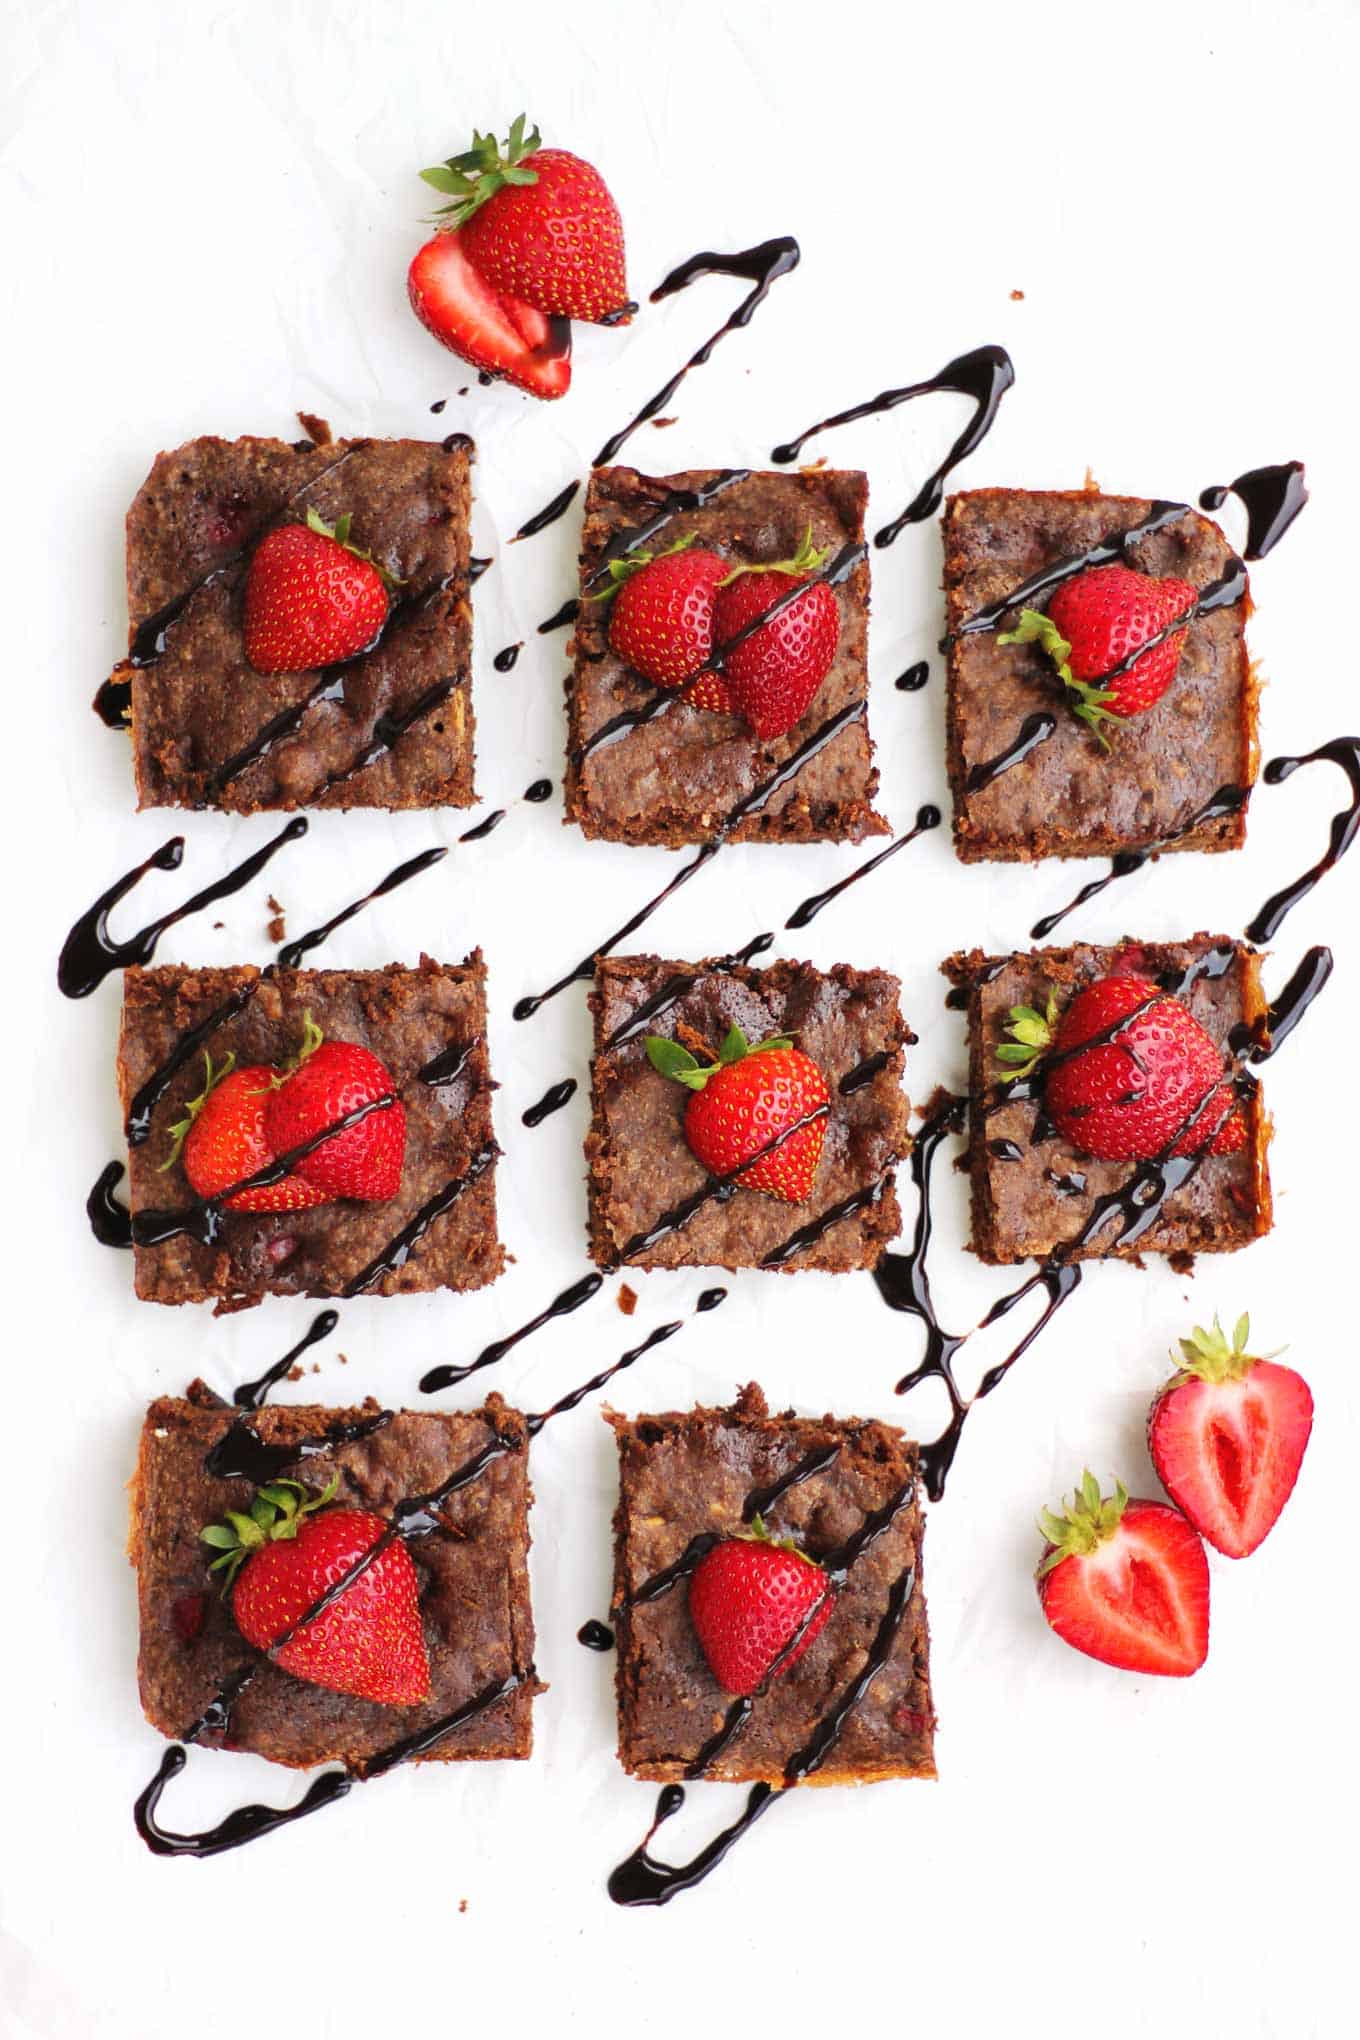 A picture of chocolate brownies with strawberries on top and drizzled with chocolate syrup.